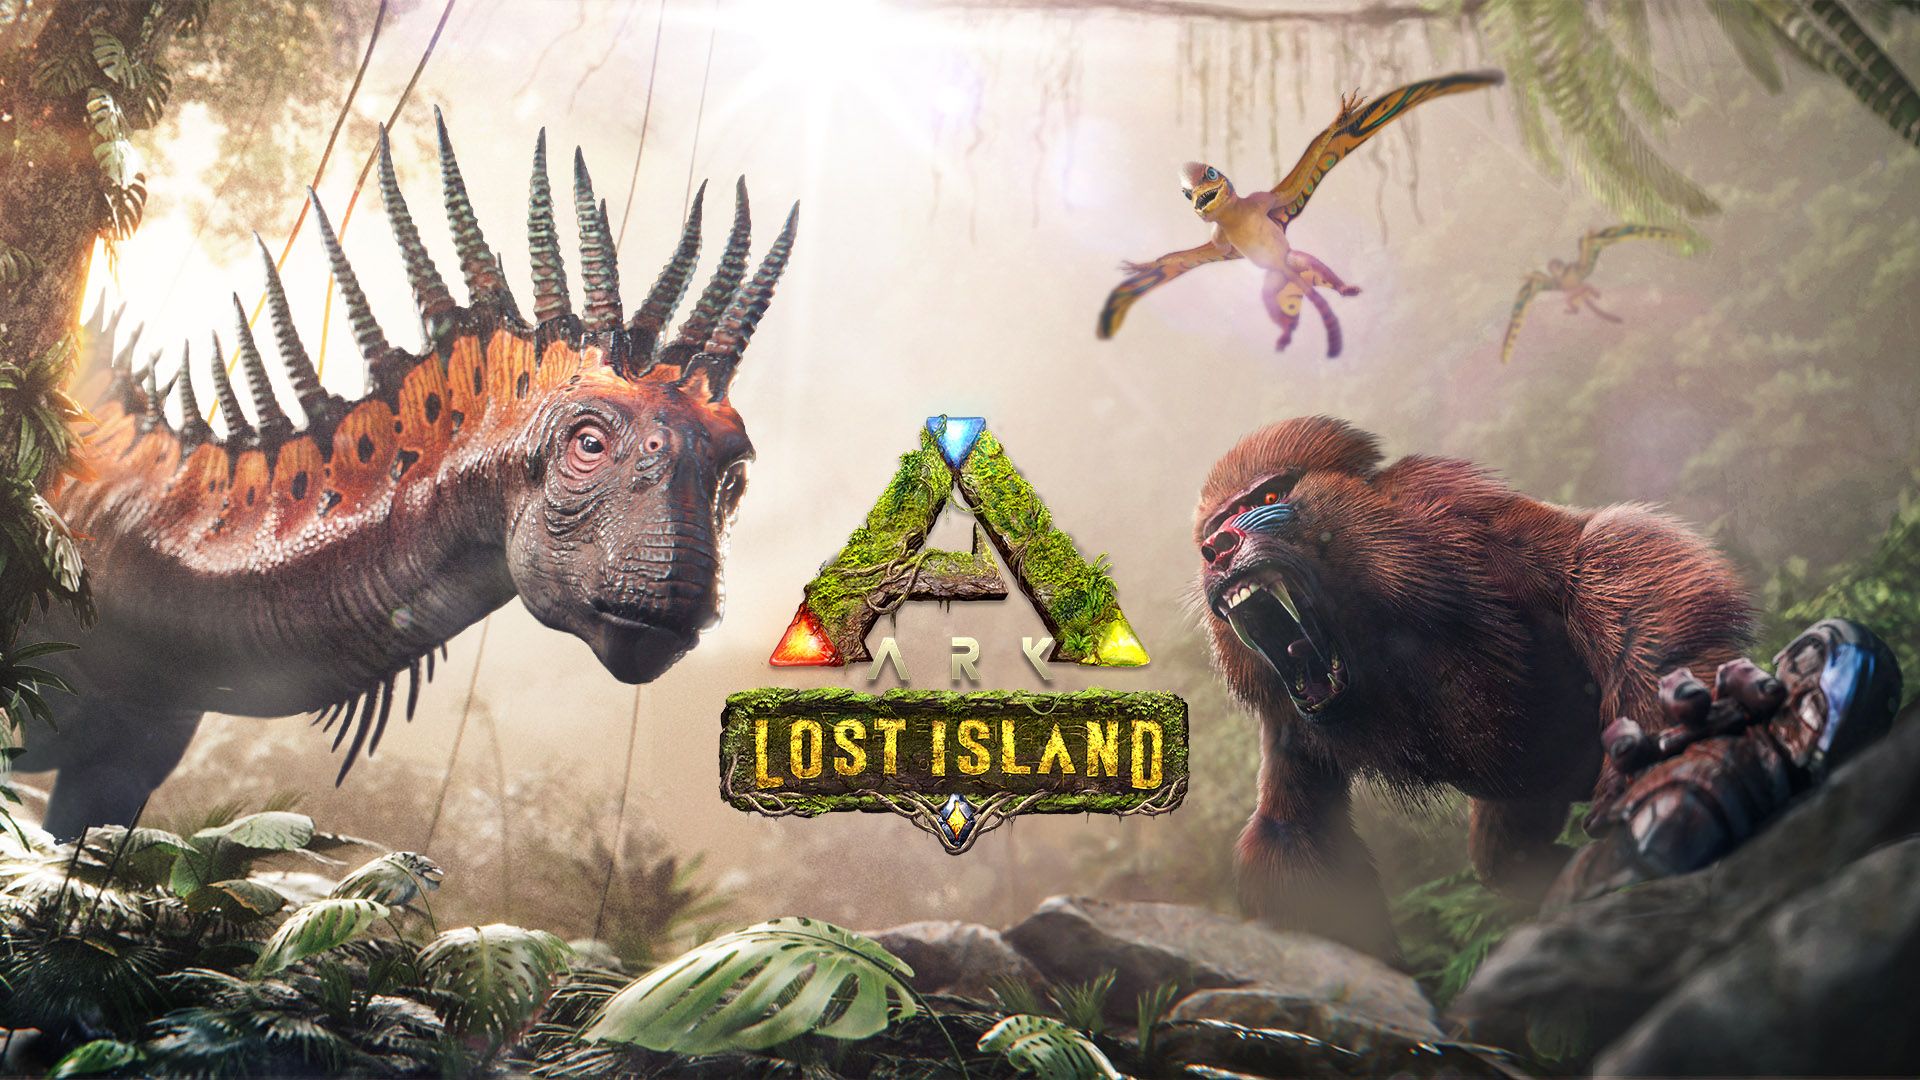 ARK Island Release Time Countdown: Release Date, Confirmed Content, And More